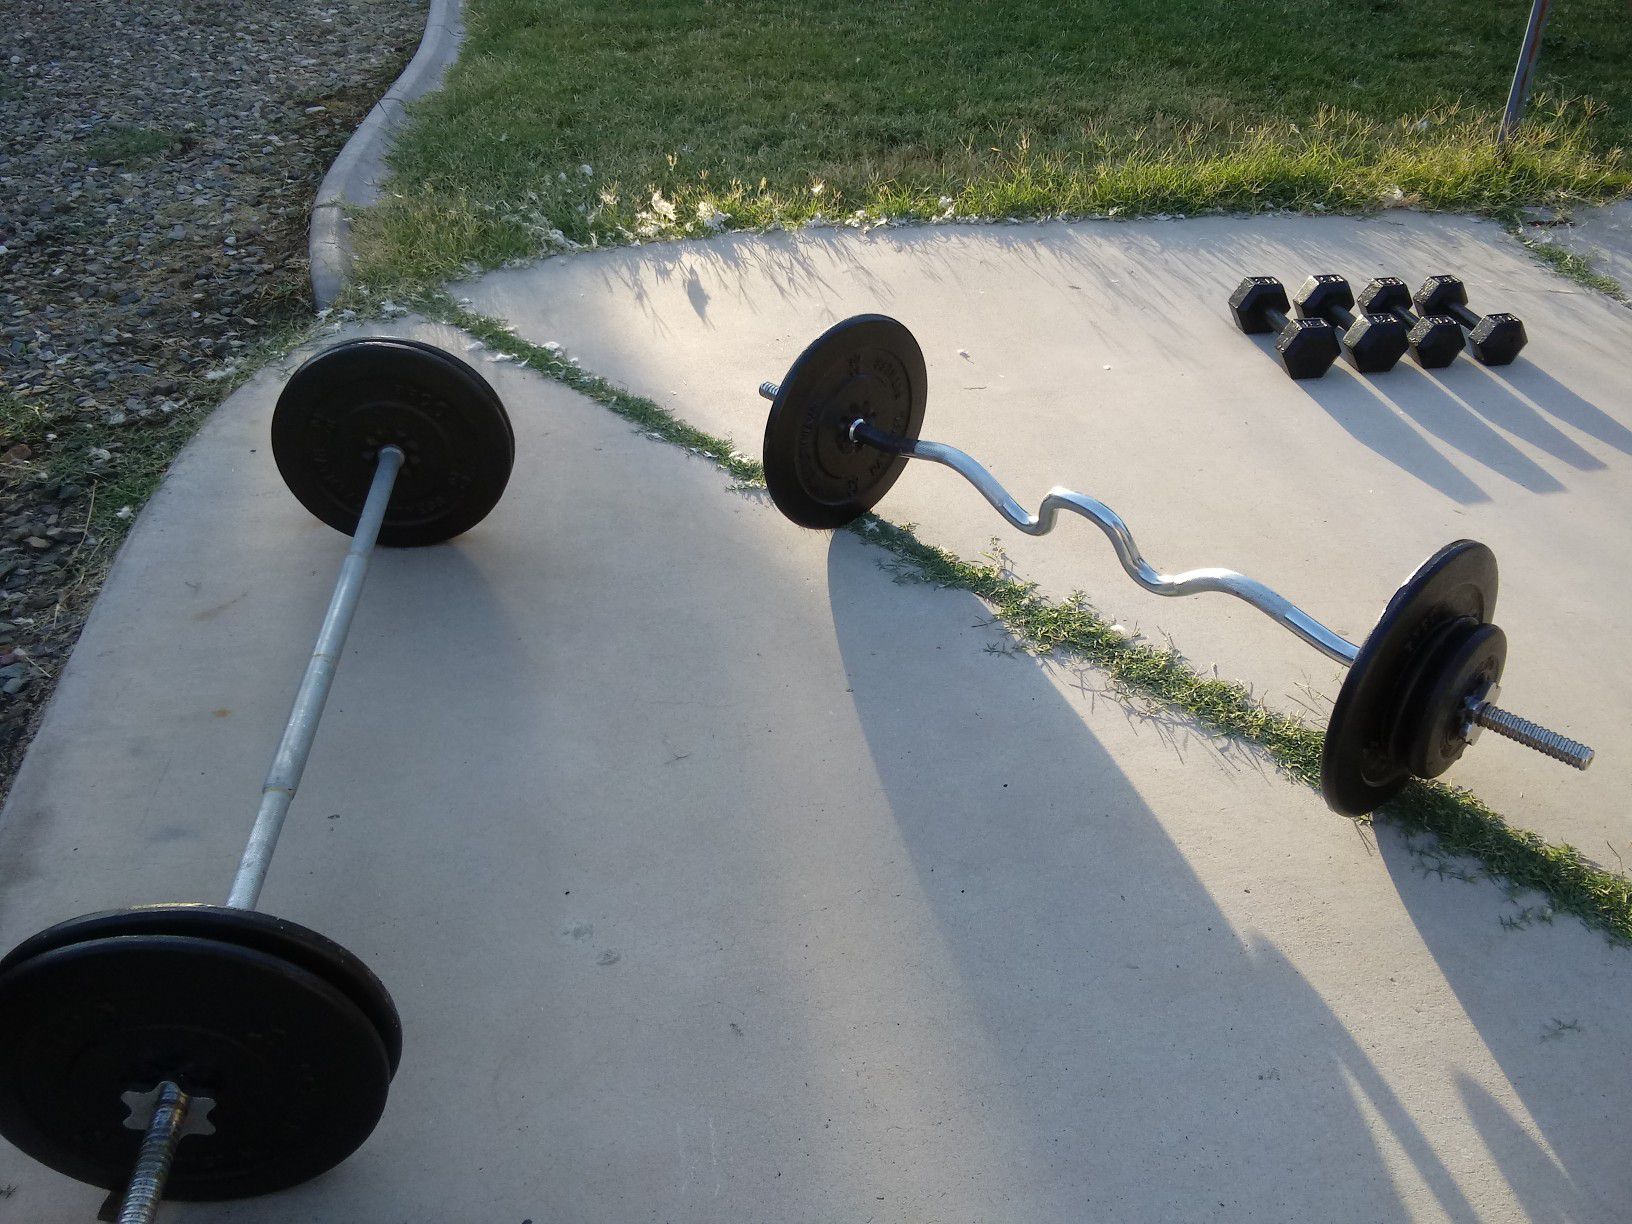 Weights standard size- Barbell and Dumbbells